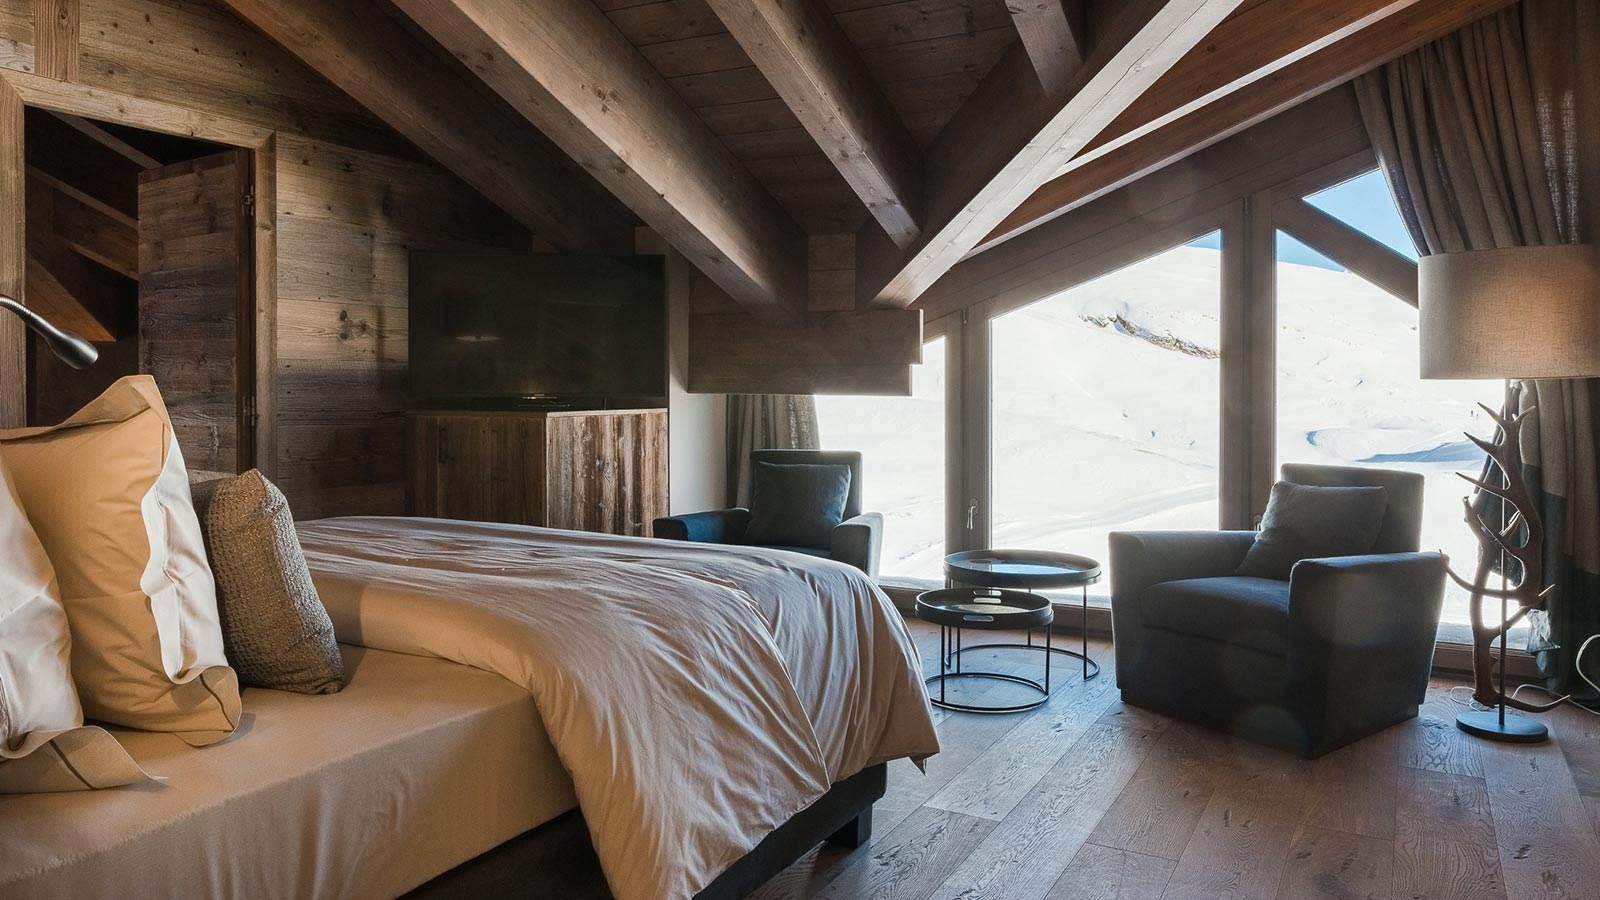 Interior of a suite in the mountain lodge